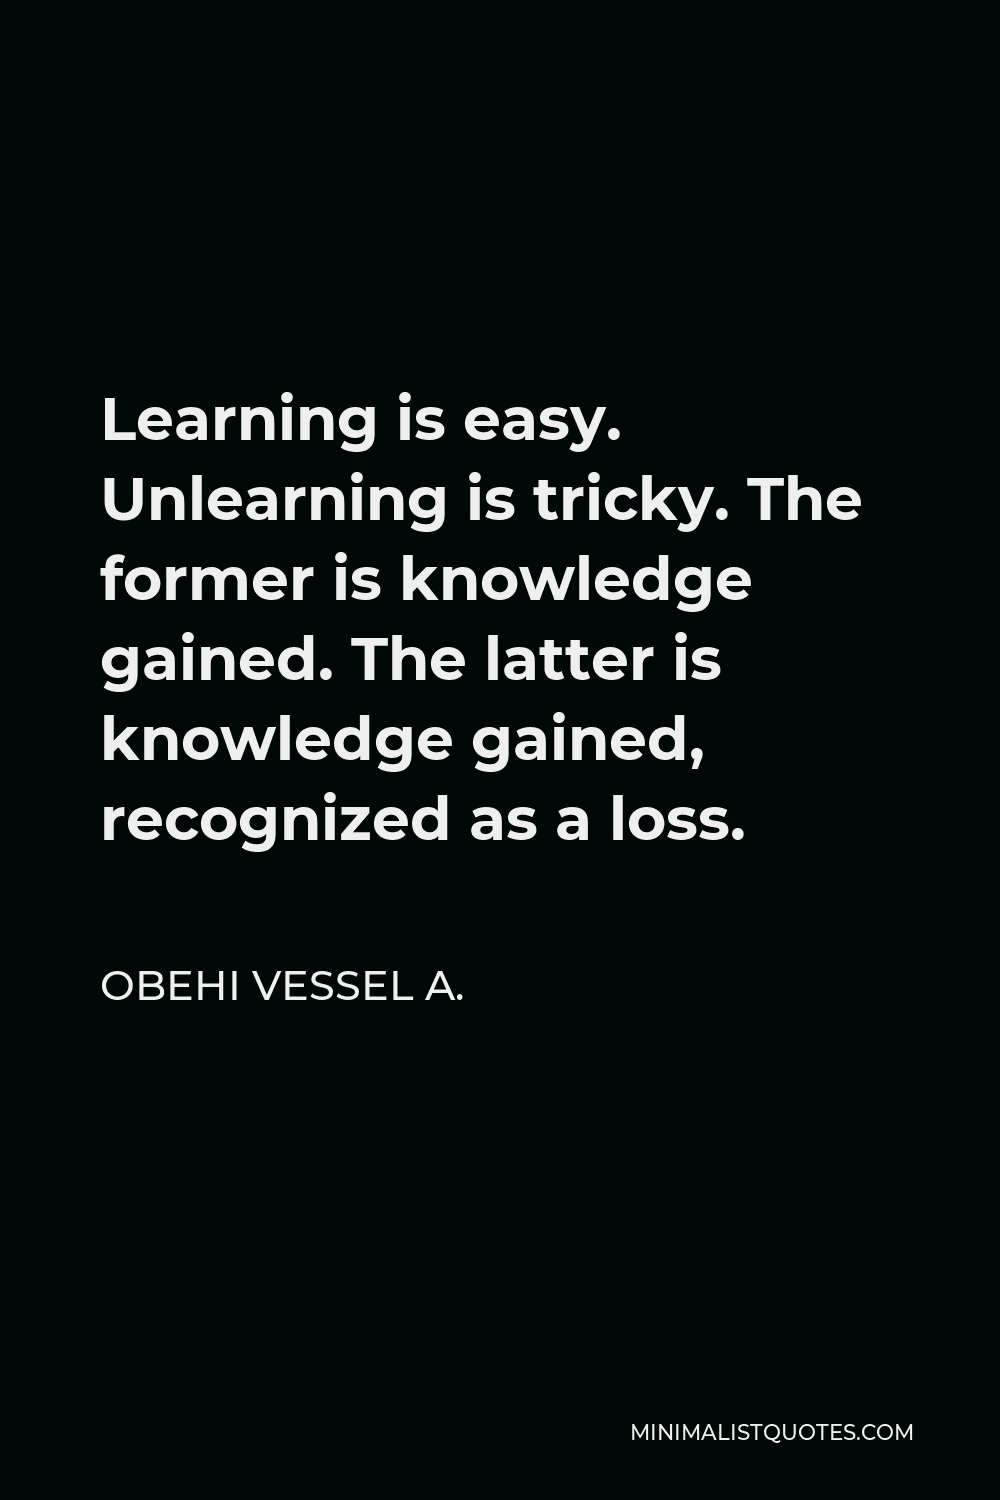 Obehi Vessel A. Quote - Learning is easy. Unlearning is tricky. The former is knowledge gained. The latter is knowledge gained, recognized as a loss.